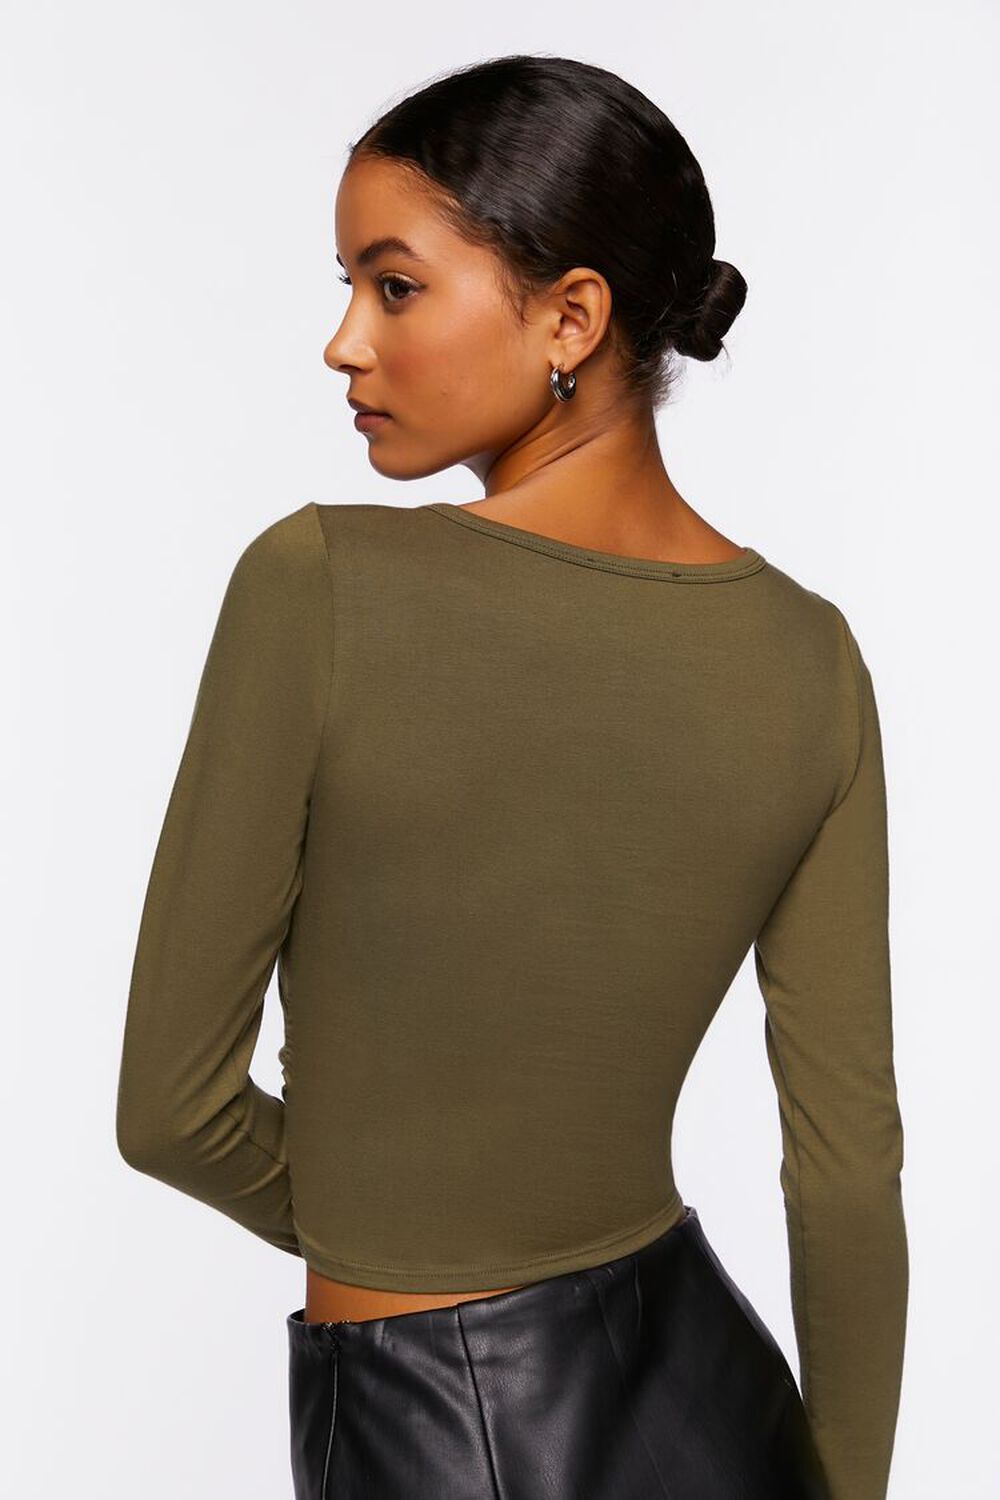 OLIVE Ruched Long-Sleeve Tee, image 3